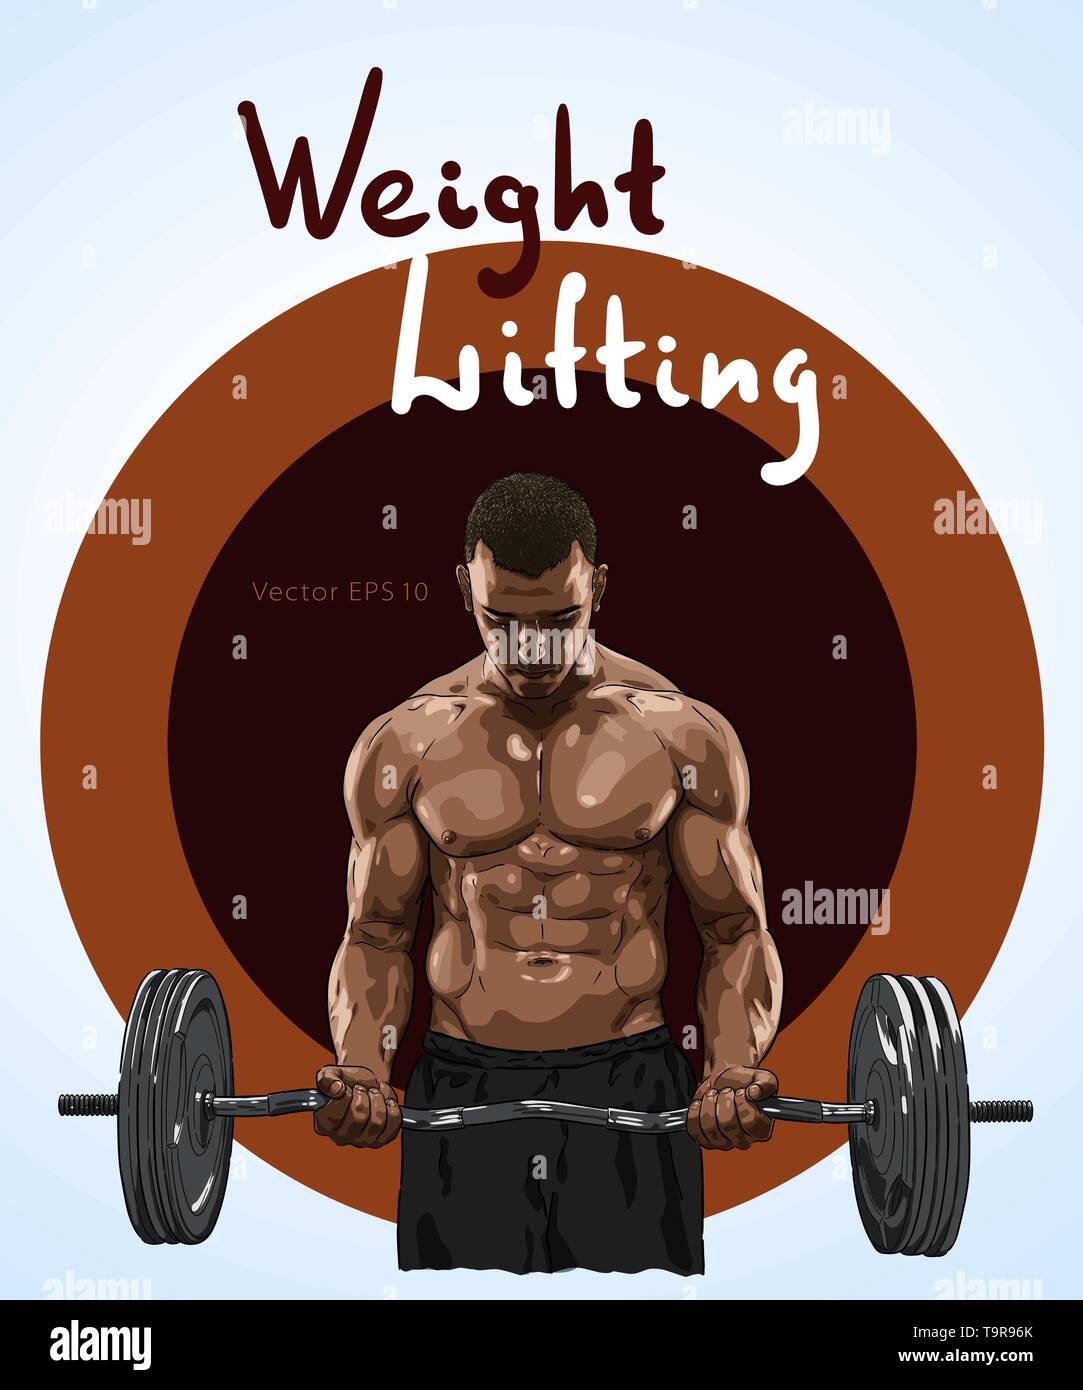 Weight Lifter man lifting heavy weight for Sports. Stock Vector